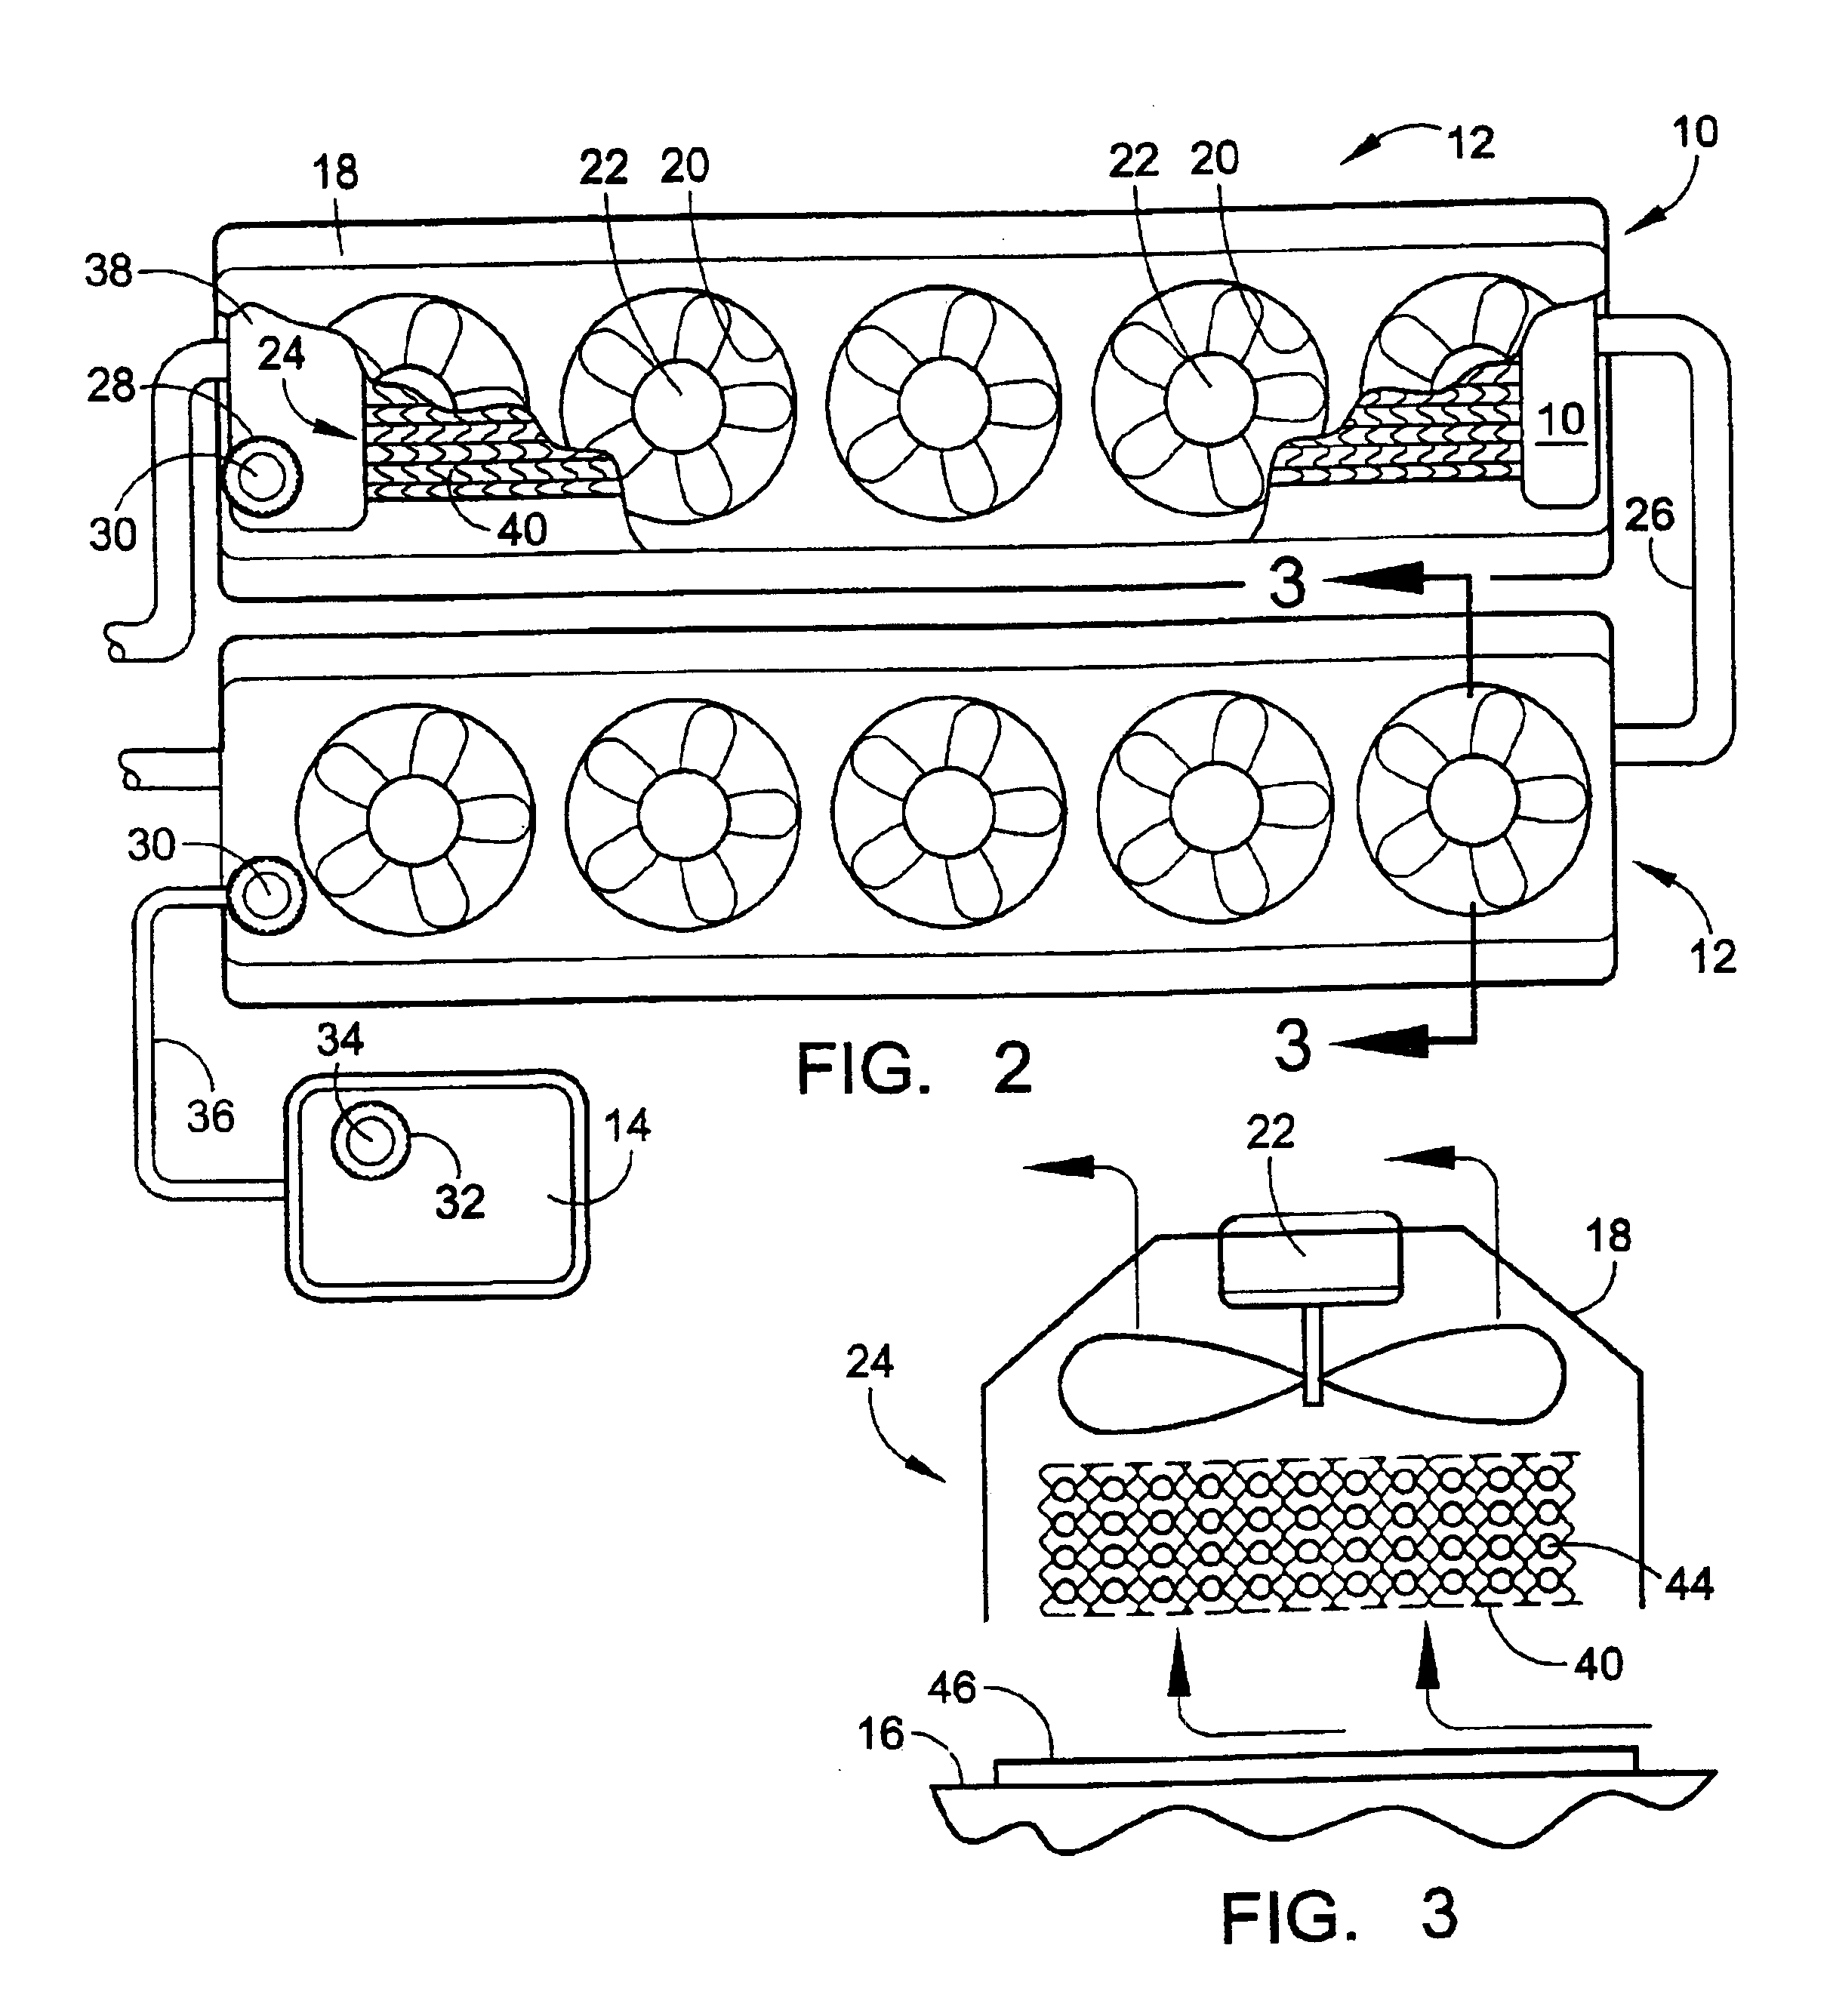 Vehicle rooftop engine cooling system